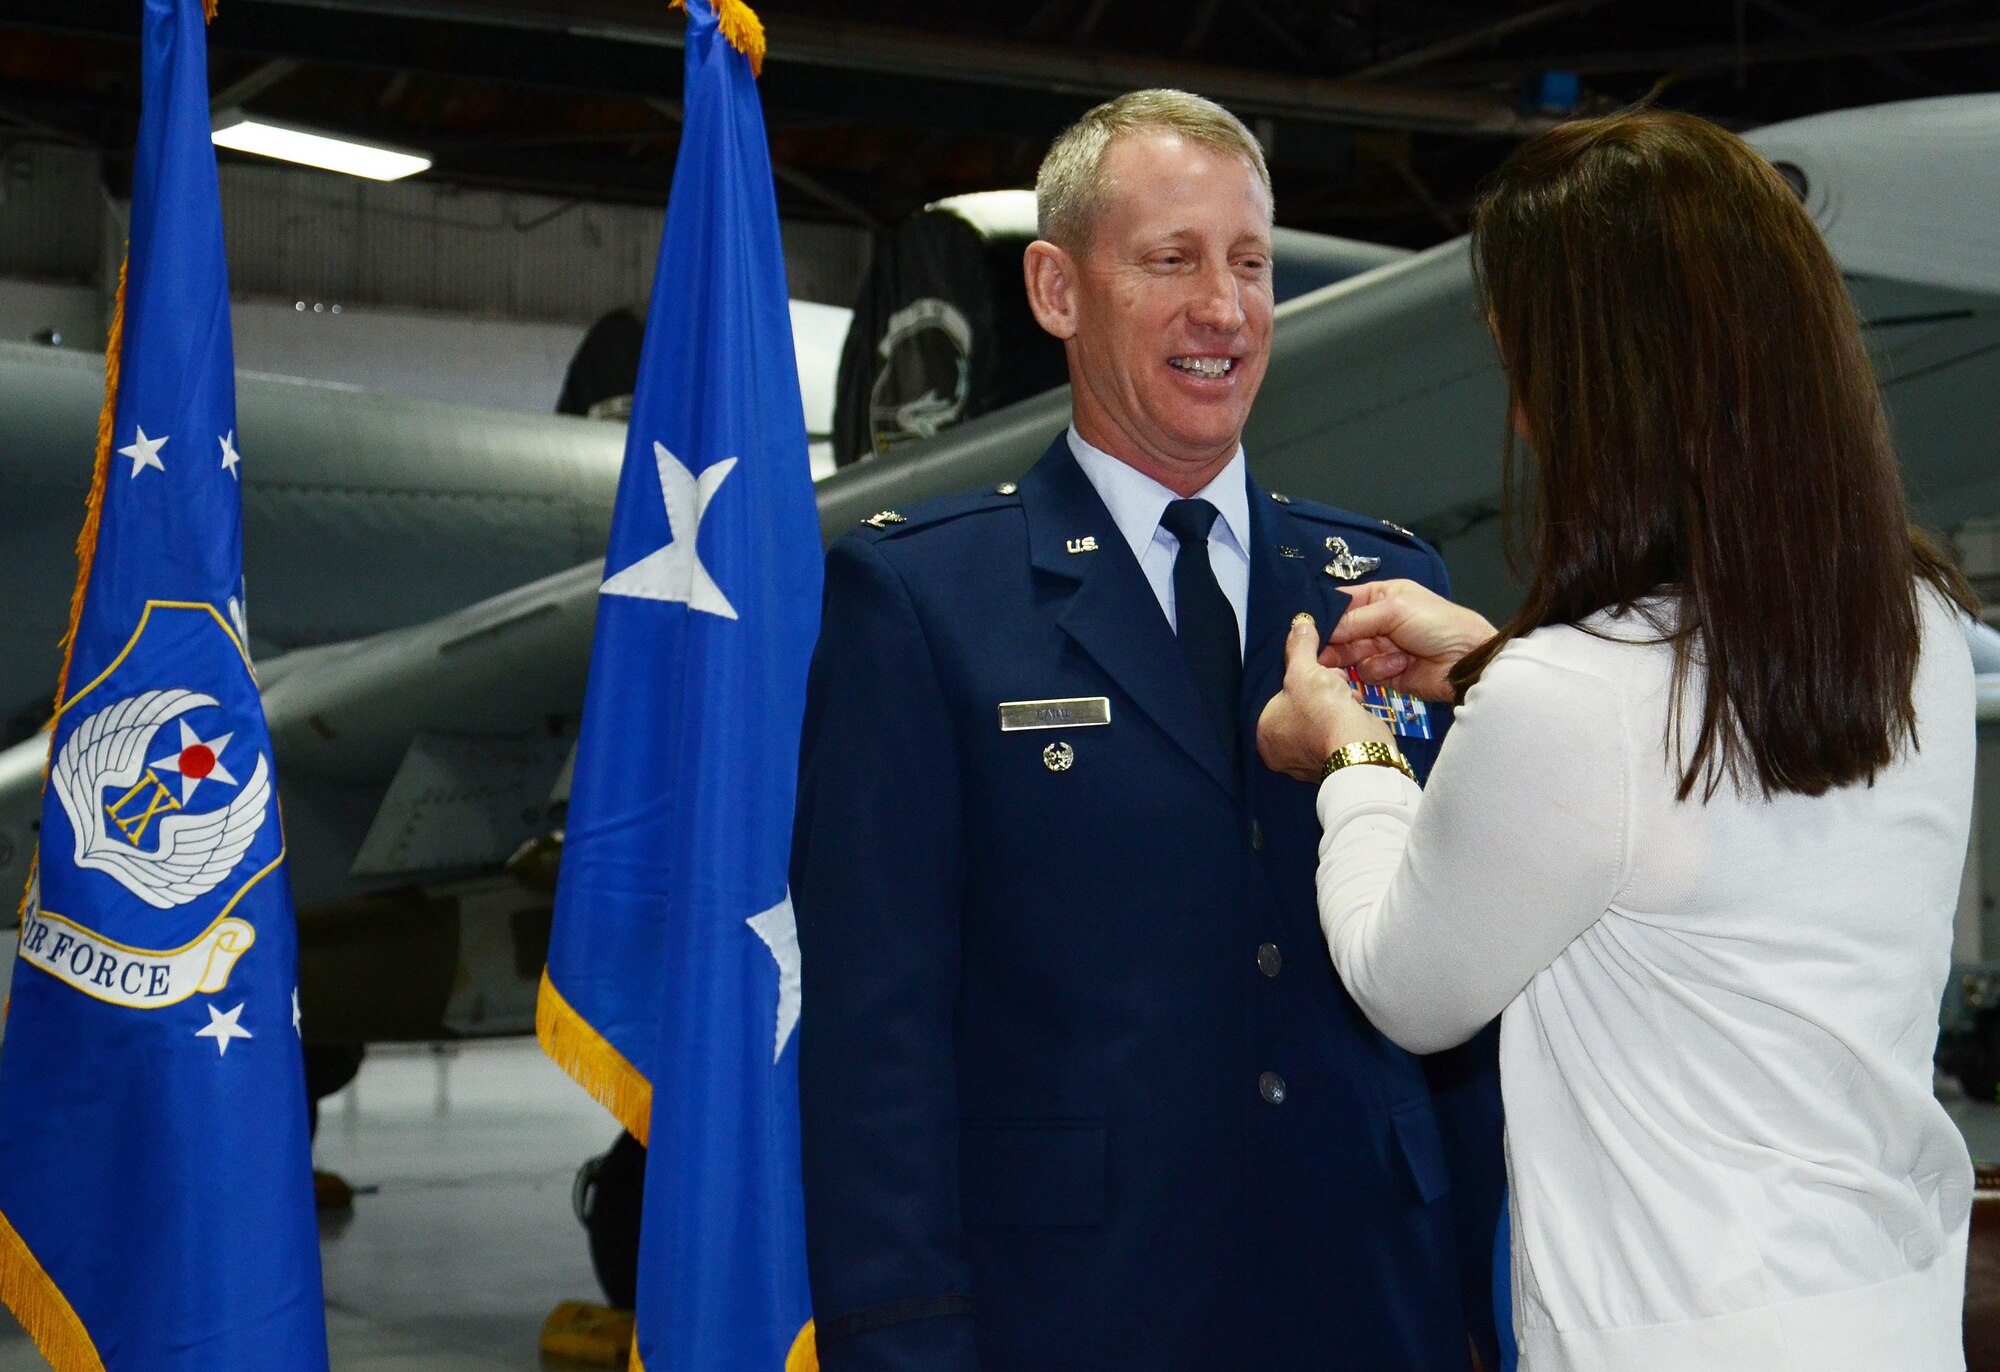 U.S. Air Force Col. Scott Caine, 9th Air Force vice commander, stands as his wife, Pam Caine, pushes in his retirement pin, Shaw Air Force Base, S.C., Feb. 10, 2017. Caine retired after 30 years in the Air Force and served in various positions throughout his career such as an aircraft maintenance officer, an A/OA-10 instructor, evaluator and pilot, and an operations officer. (U.S. Air Force photo by Tech. Sgt. Amanda Dick)